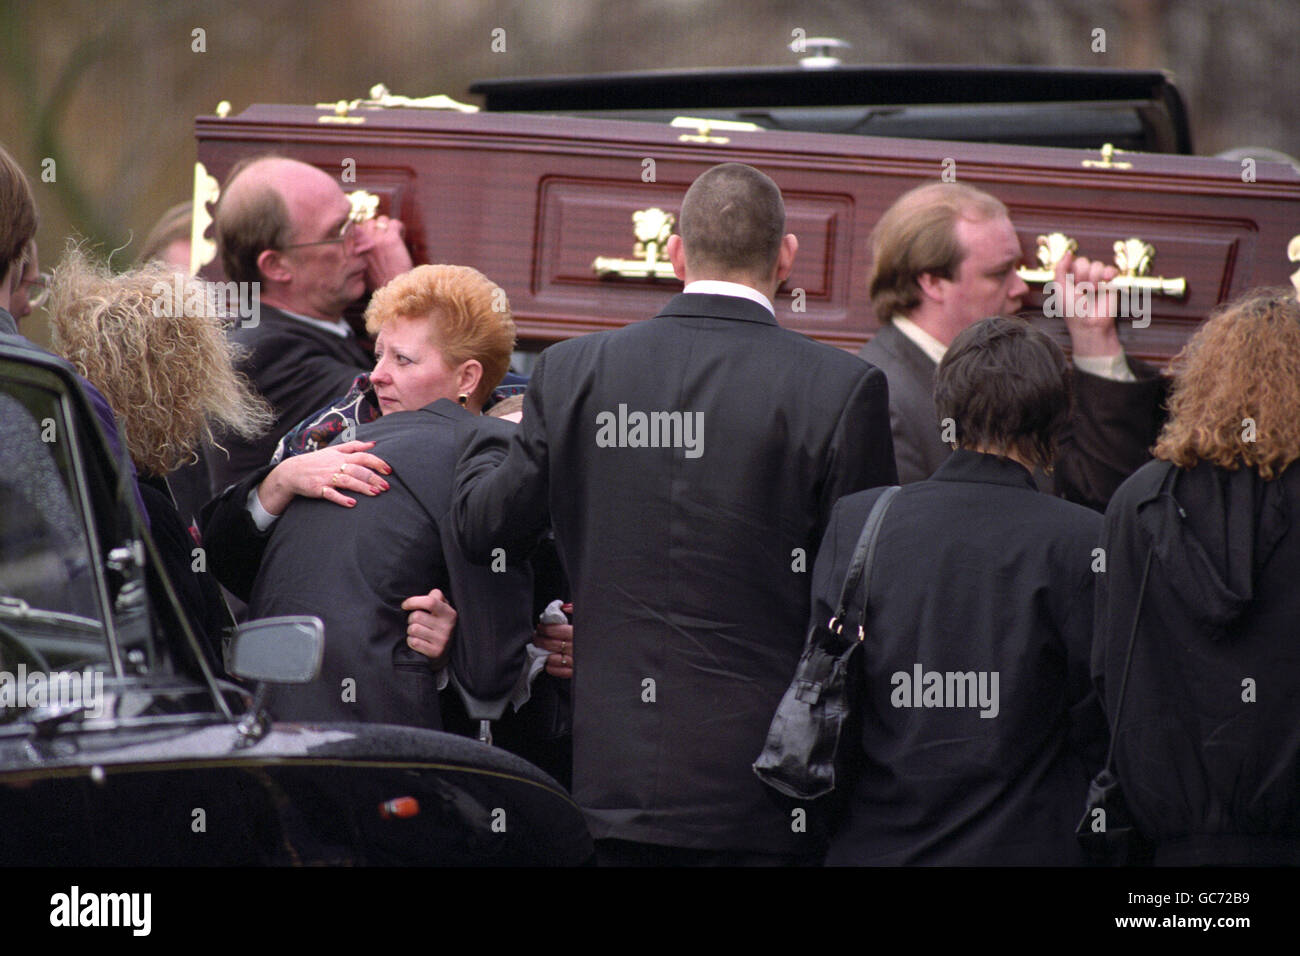 ELIZABETH CAPPER, MOTHER OF MURDERED TEENAGER SUZANNE CAPPER, COMFORTS ONE OF HER SONS, STEVE, AS SUZANNE'S COFFIN ENTERS THE CHURCH AT BLACKLEY CEMETRY. Stock Photo